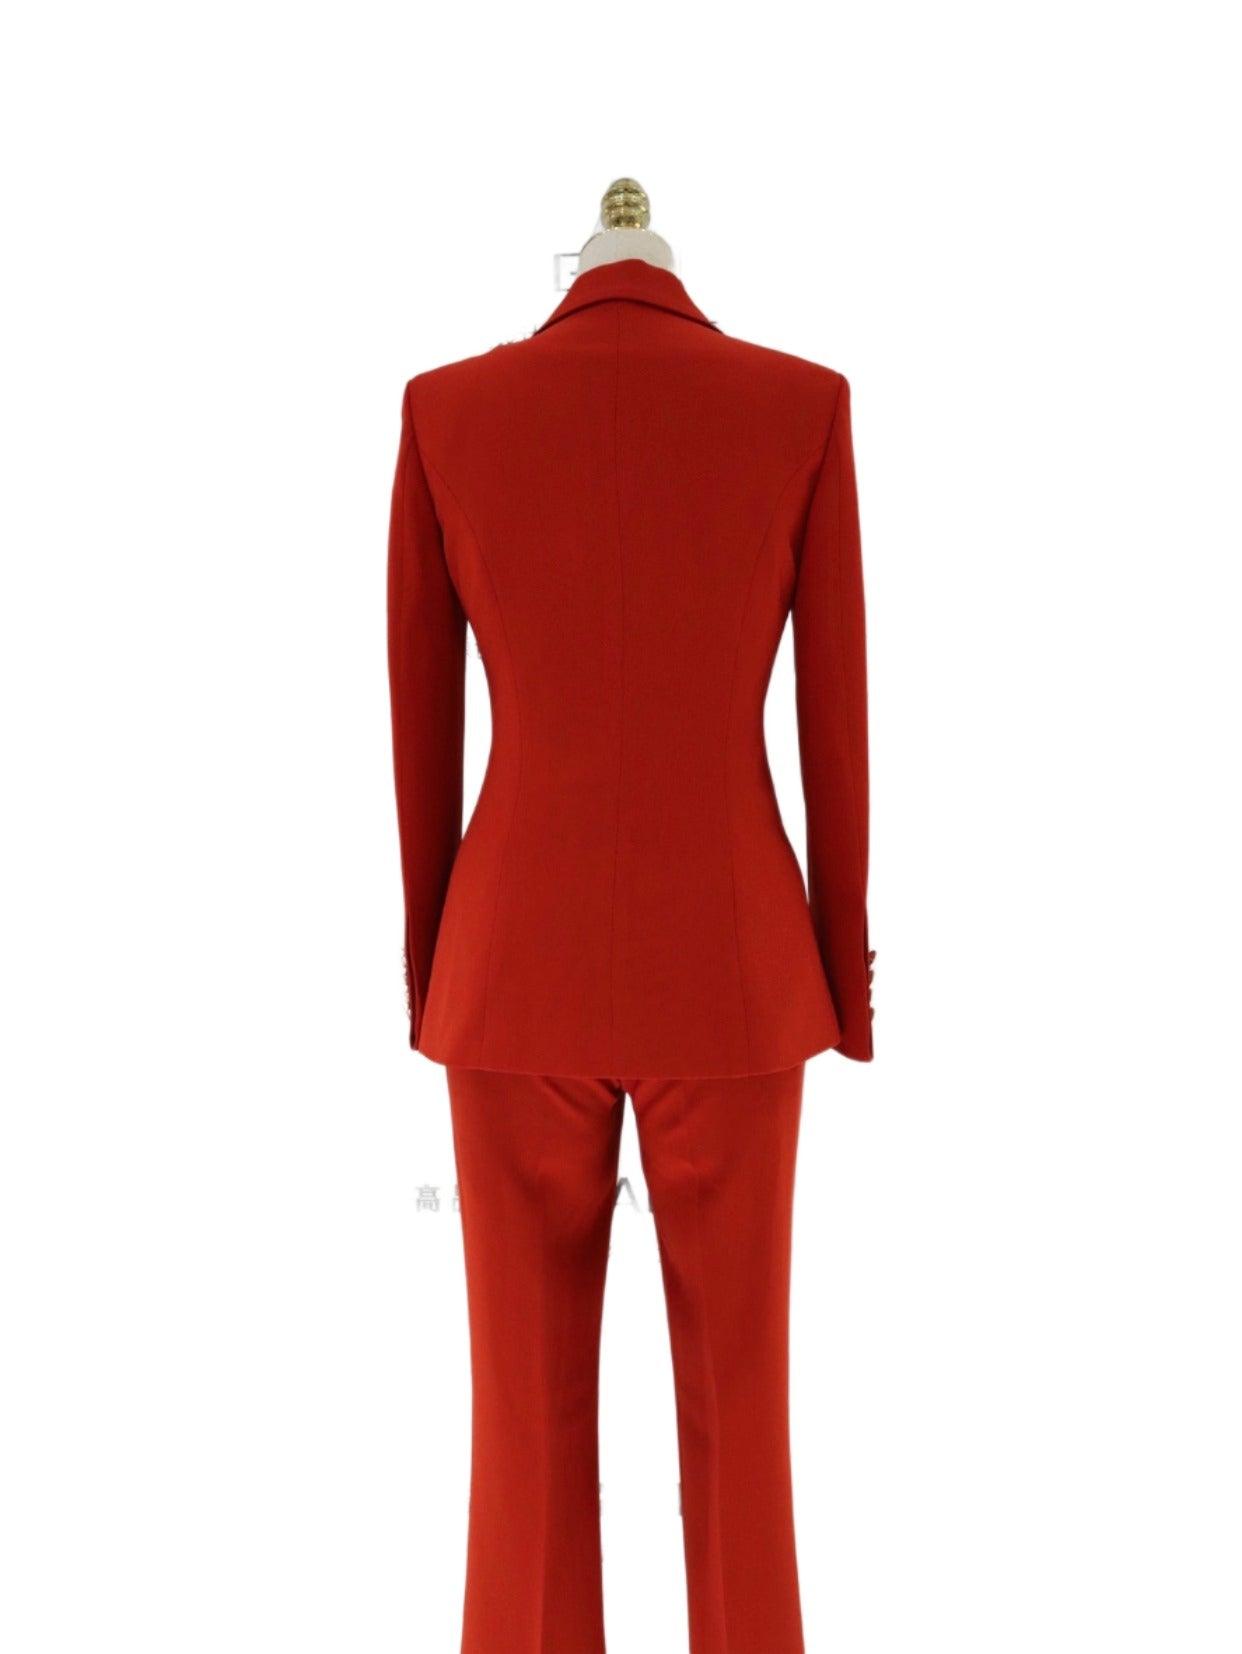 Red Double-Breasted Trouser Suit - Women Flared Pants Suit - Pantsuit - Guocali